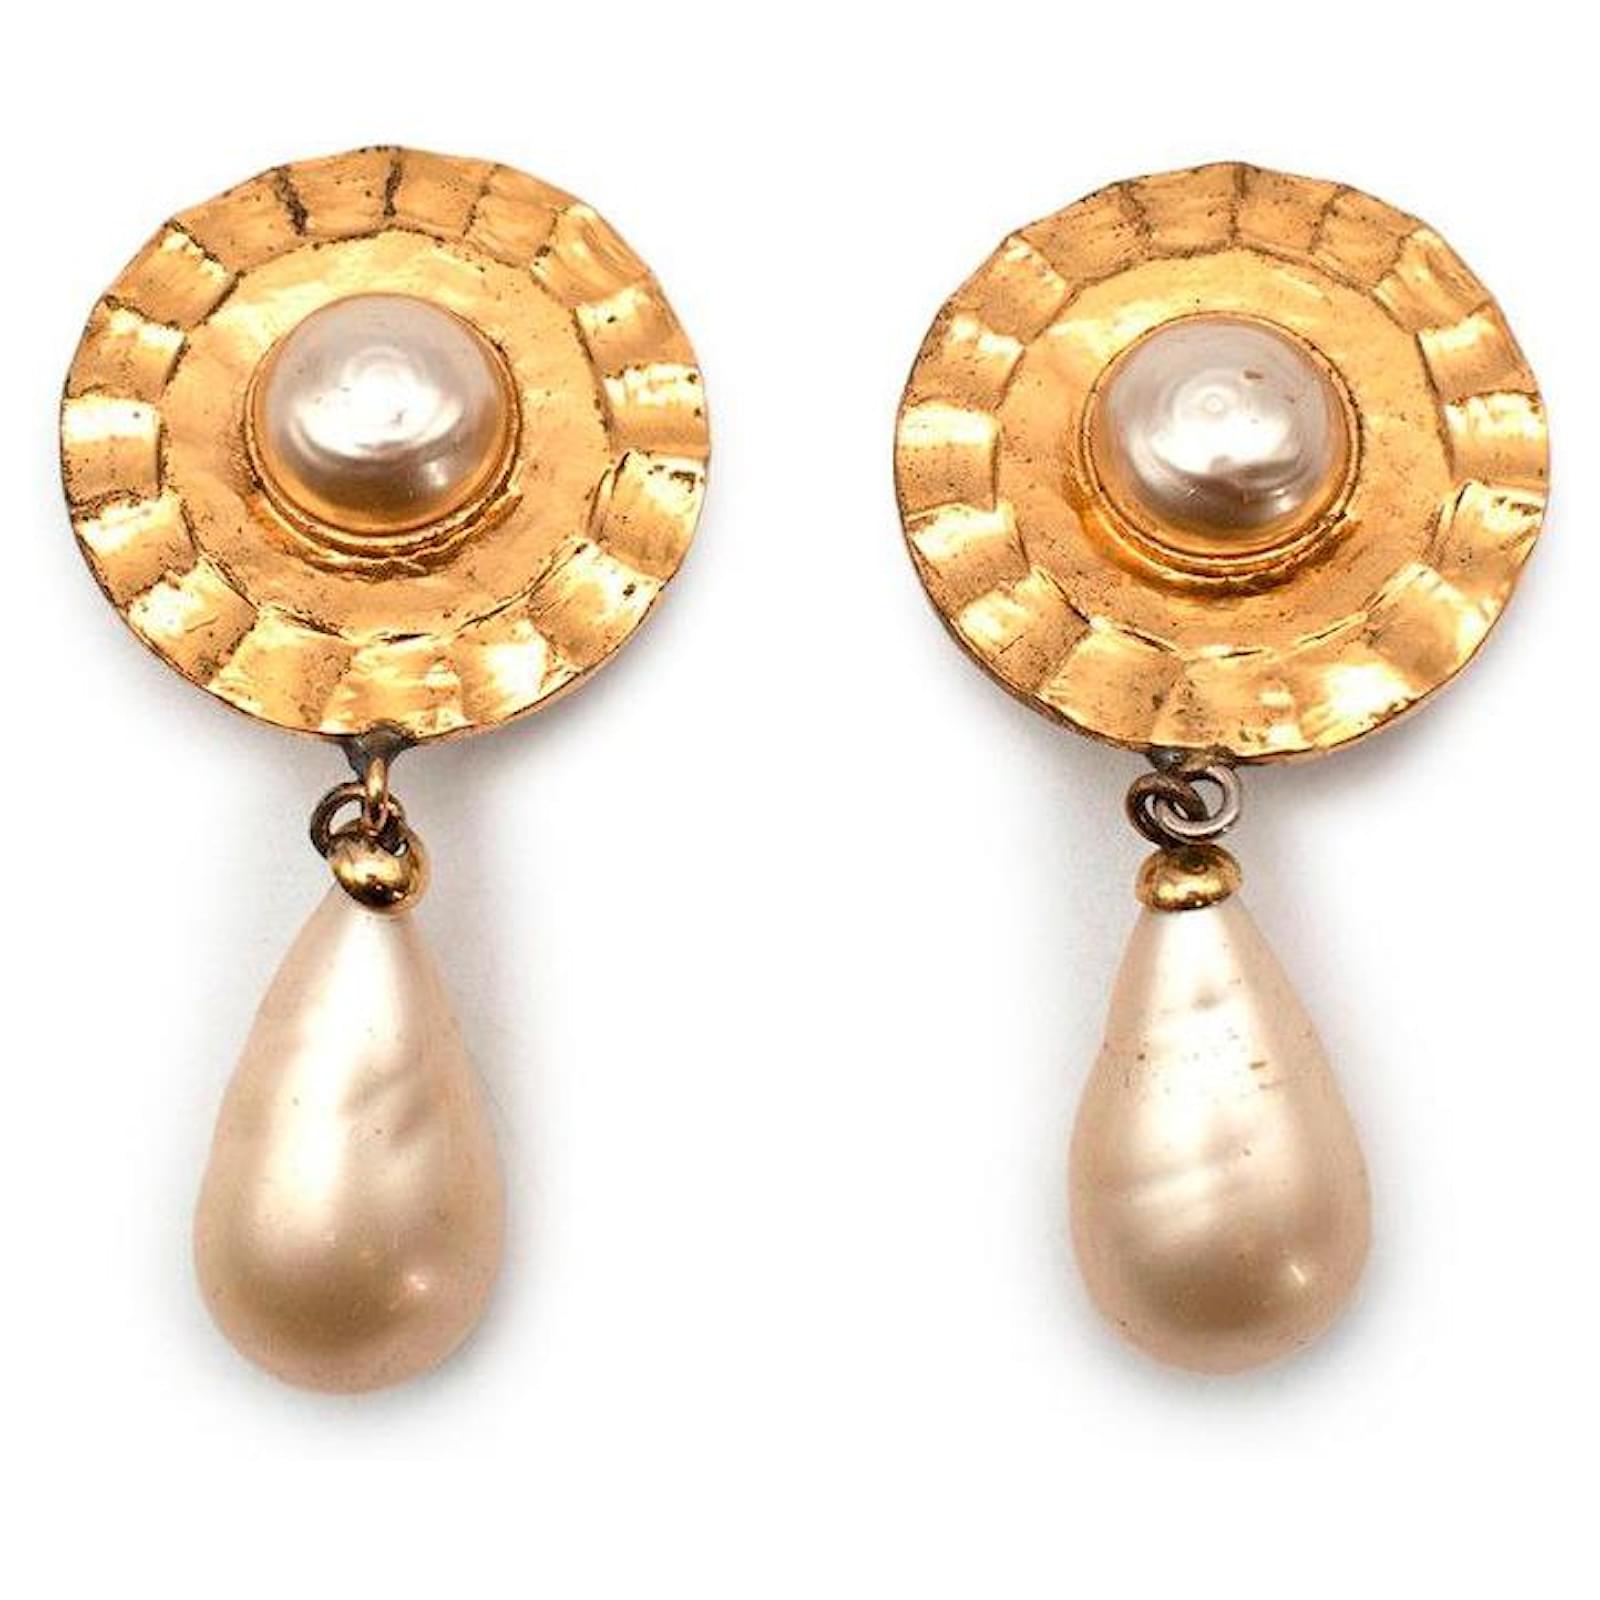 Chanel Cc Drop Earring Metal With Faux Pearls 